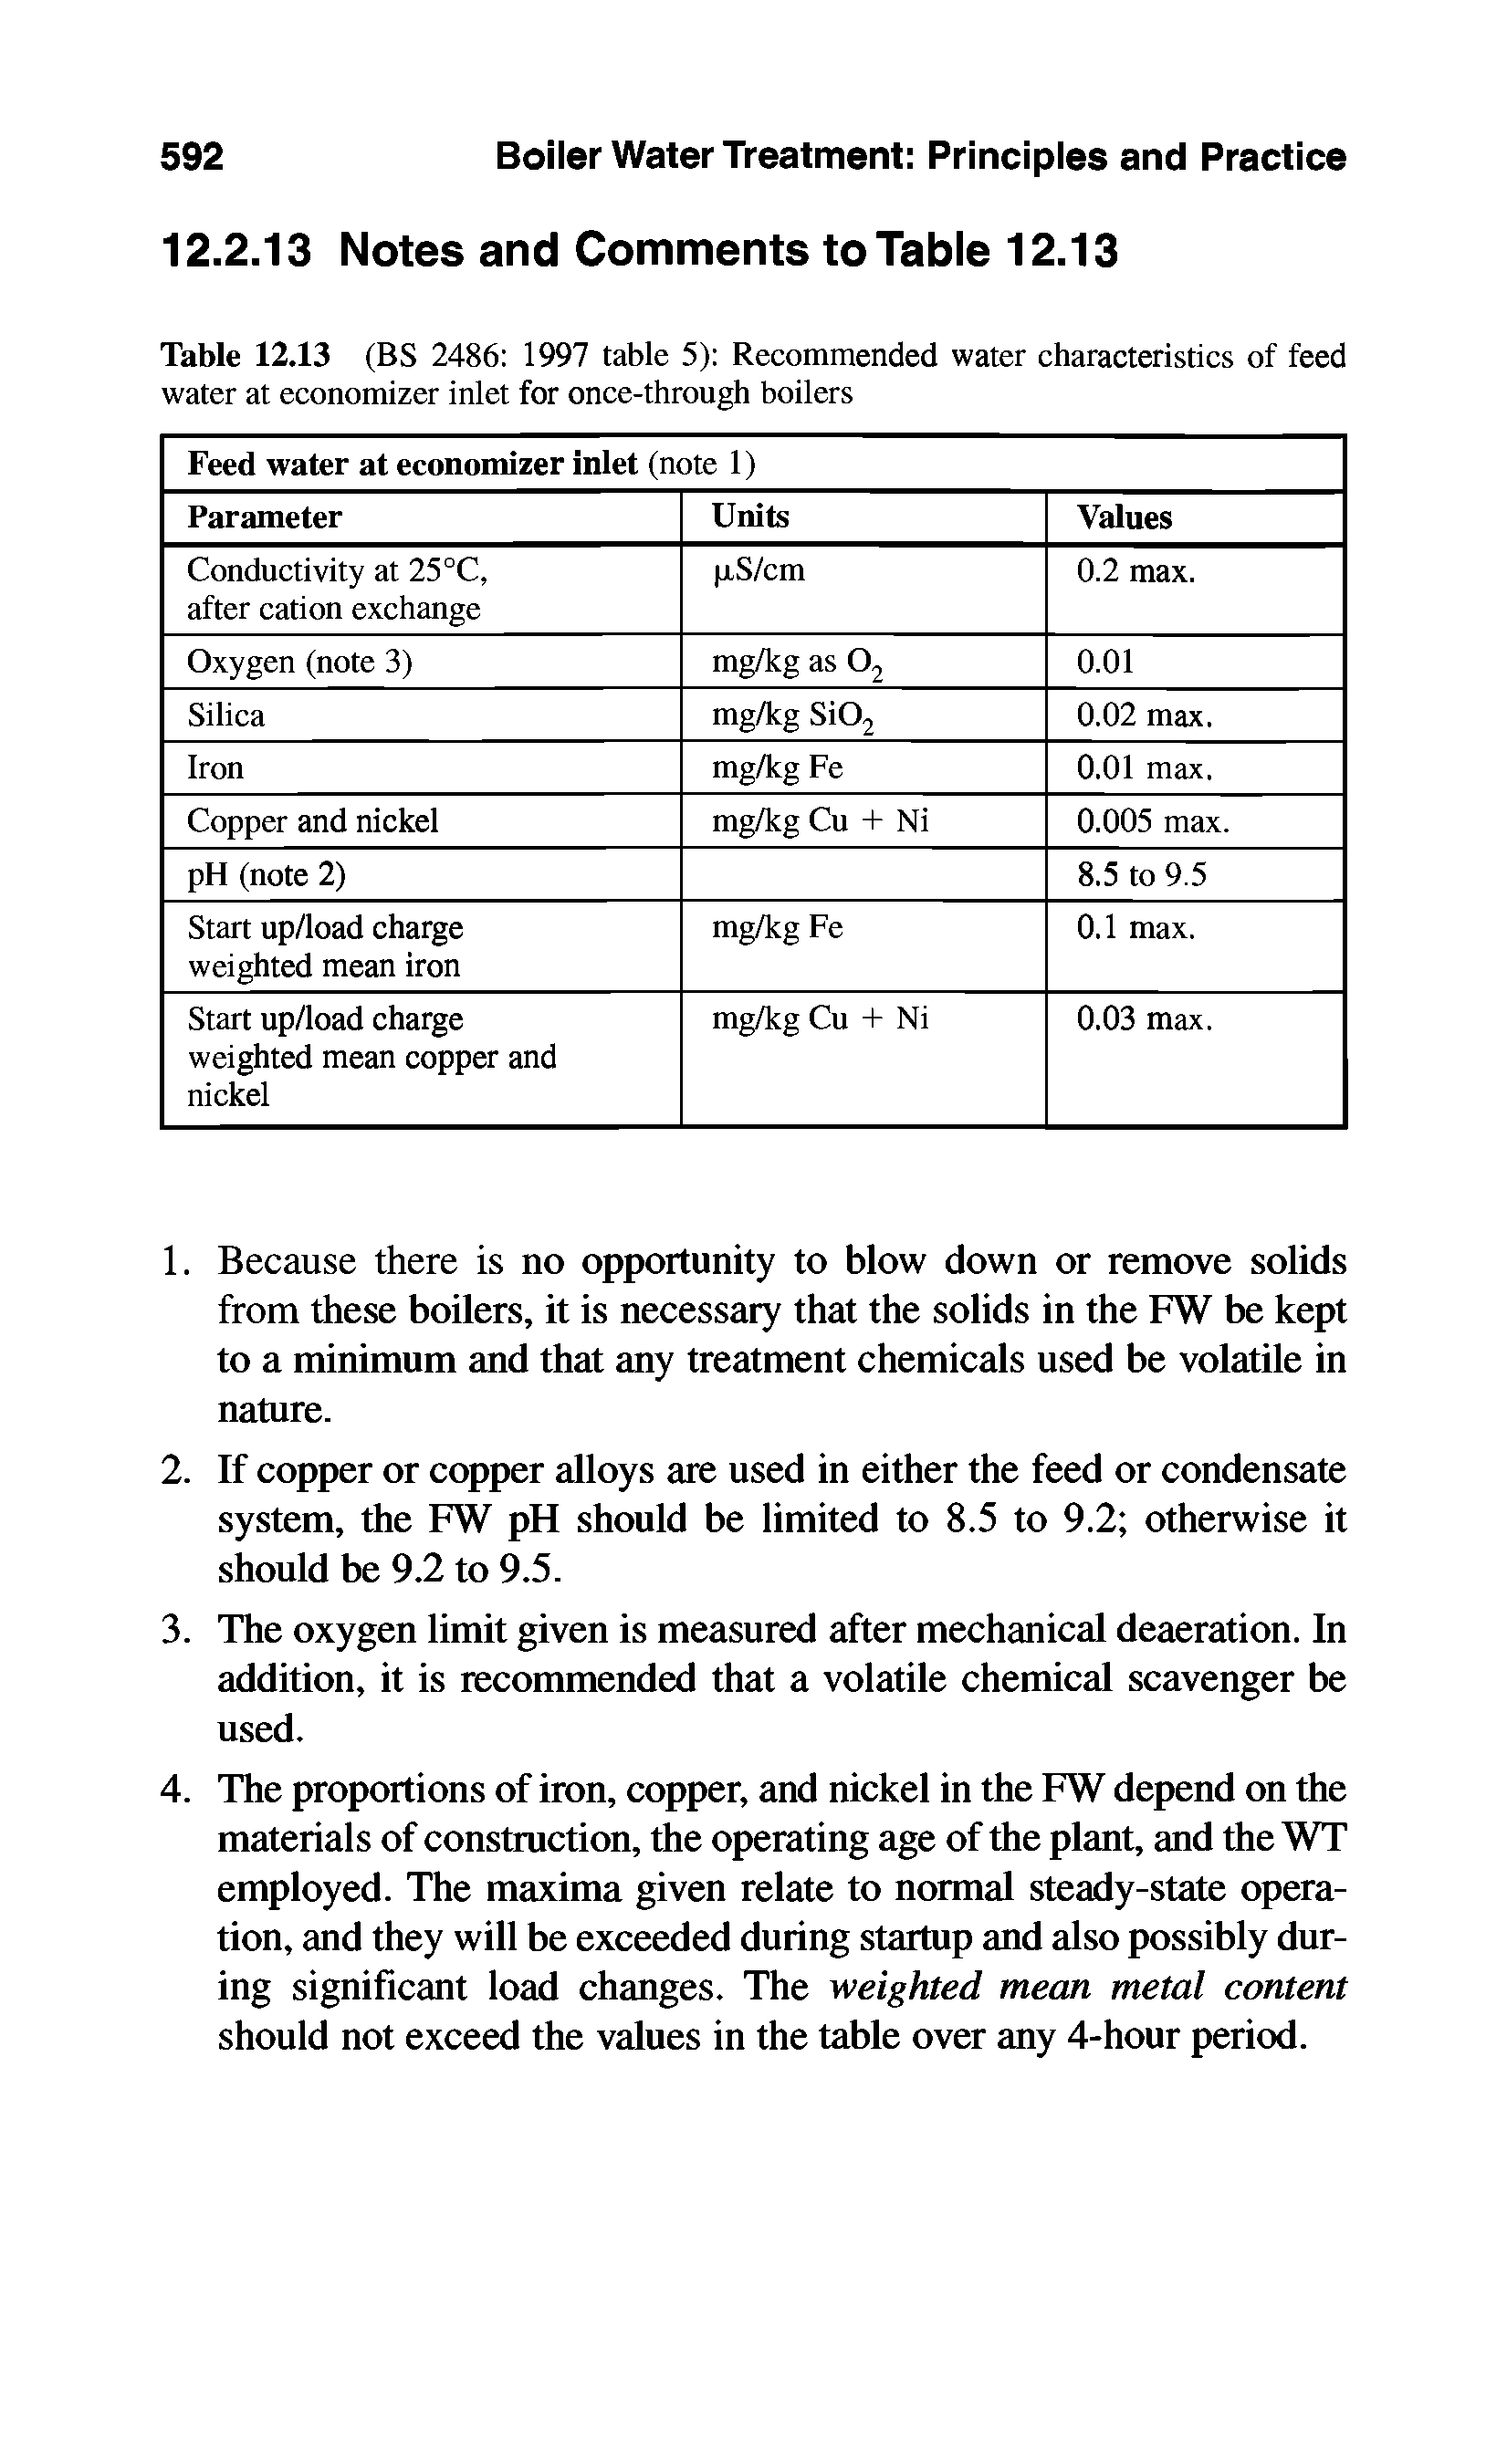 Table 12.13 (BS 2486 1997 table 5) Recommended water characteristics of feed water at economizer inlet for once-through boilers...